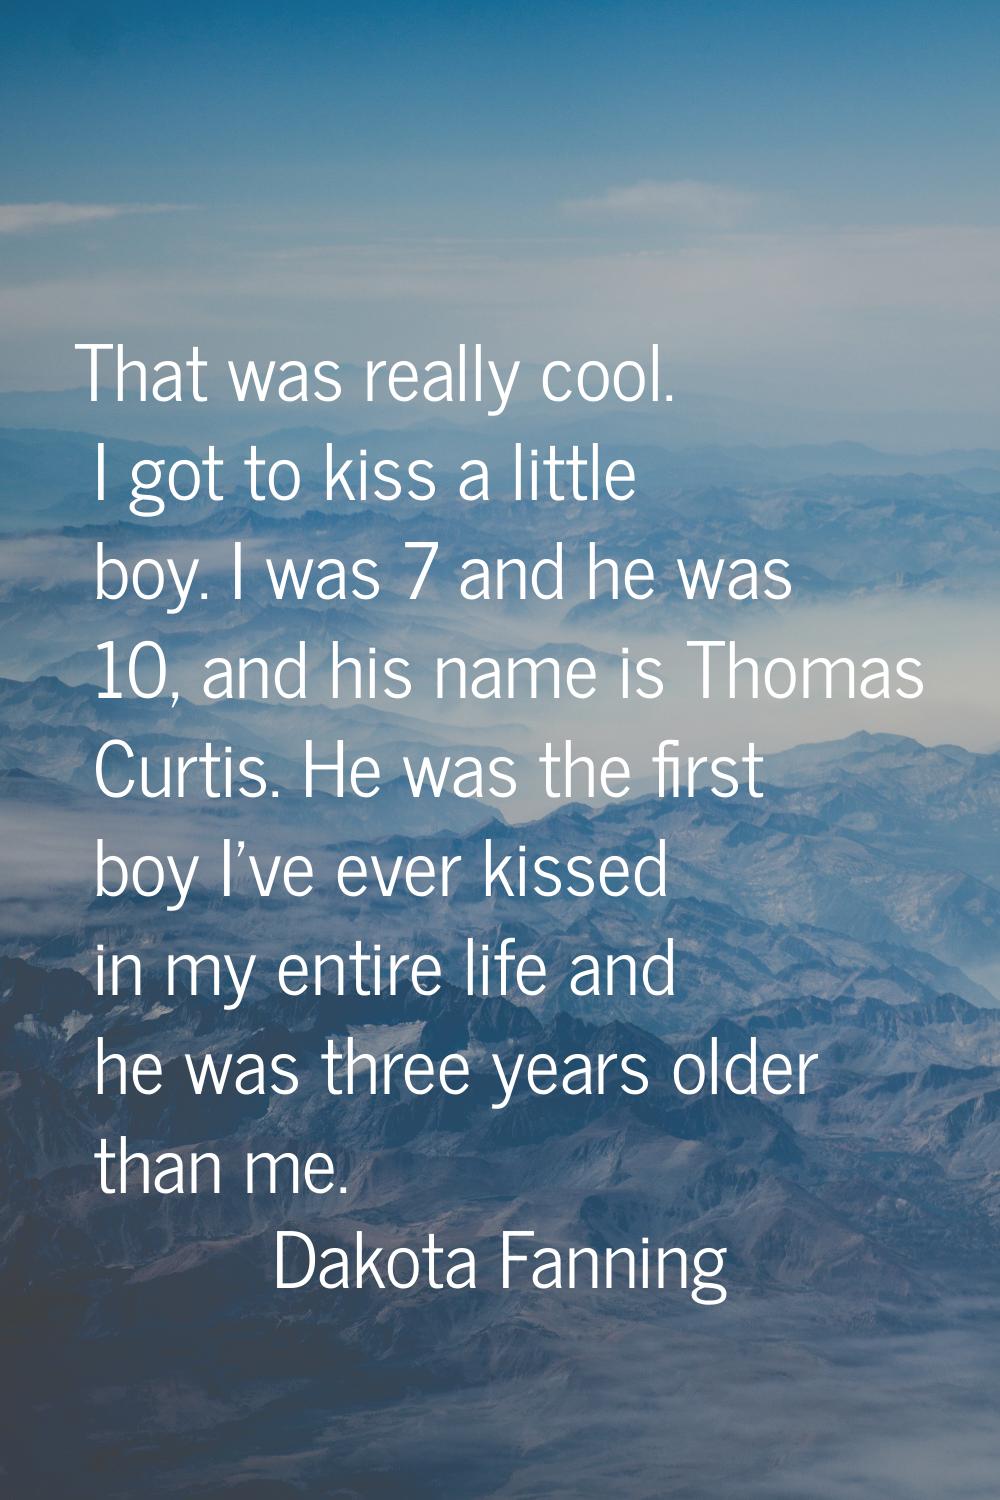 That was really cool. I got to kiss a little boy. I was 7 and he was 10, and his name is Thomas Cur